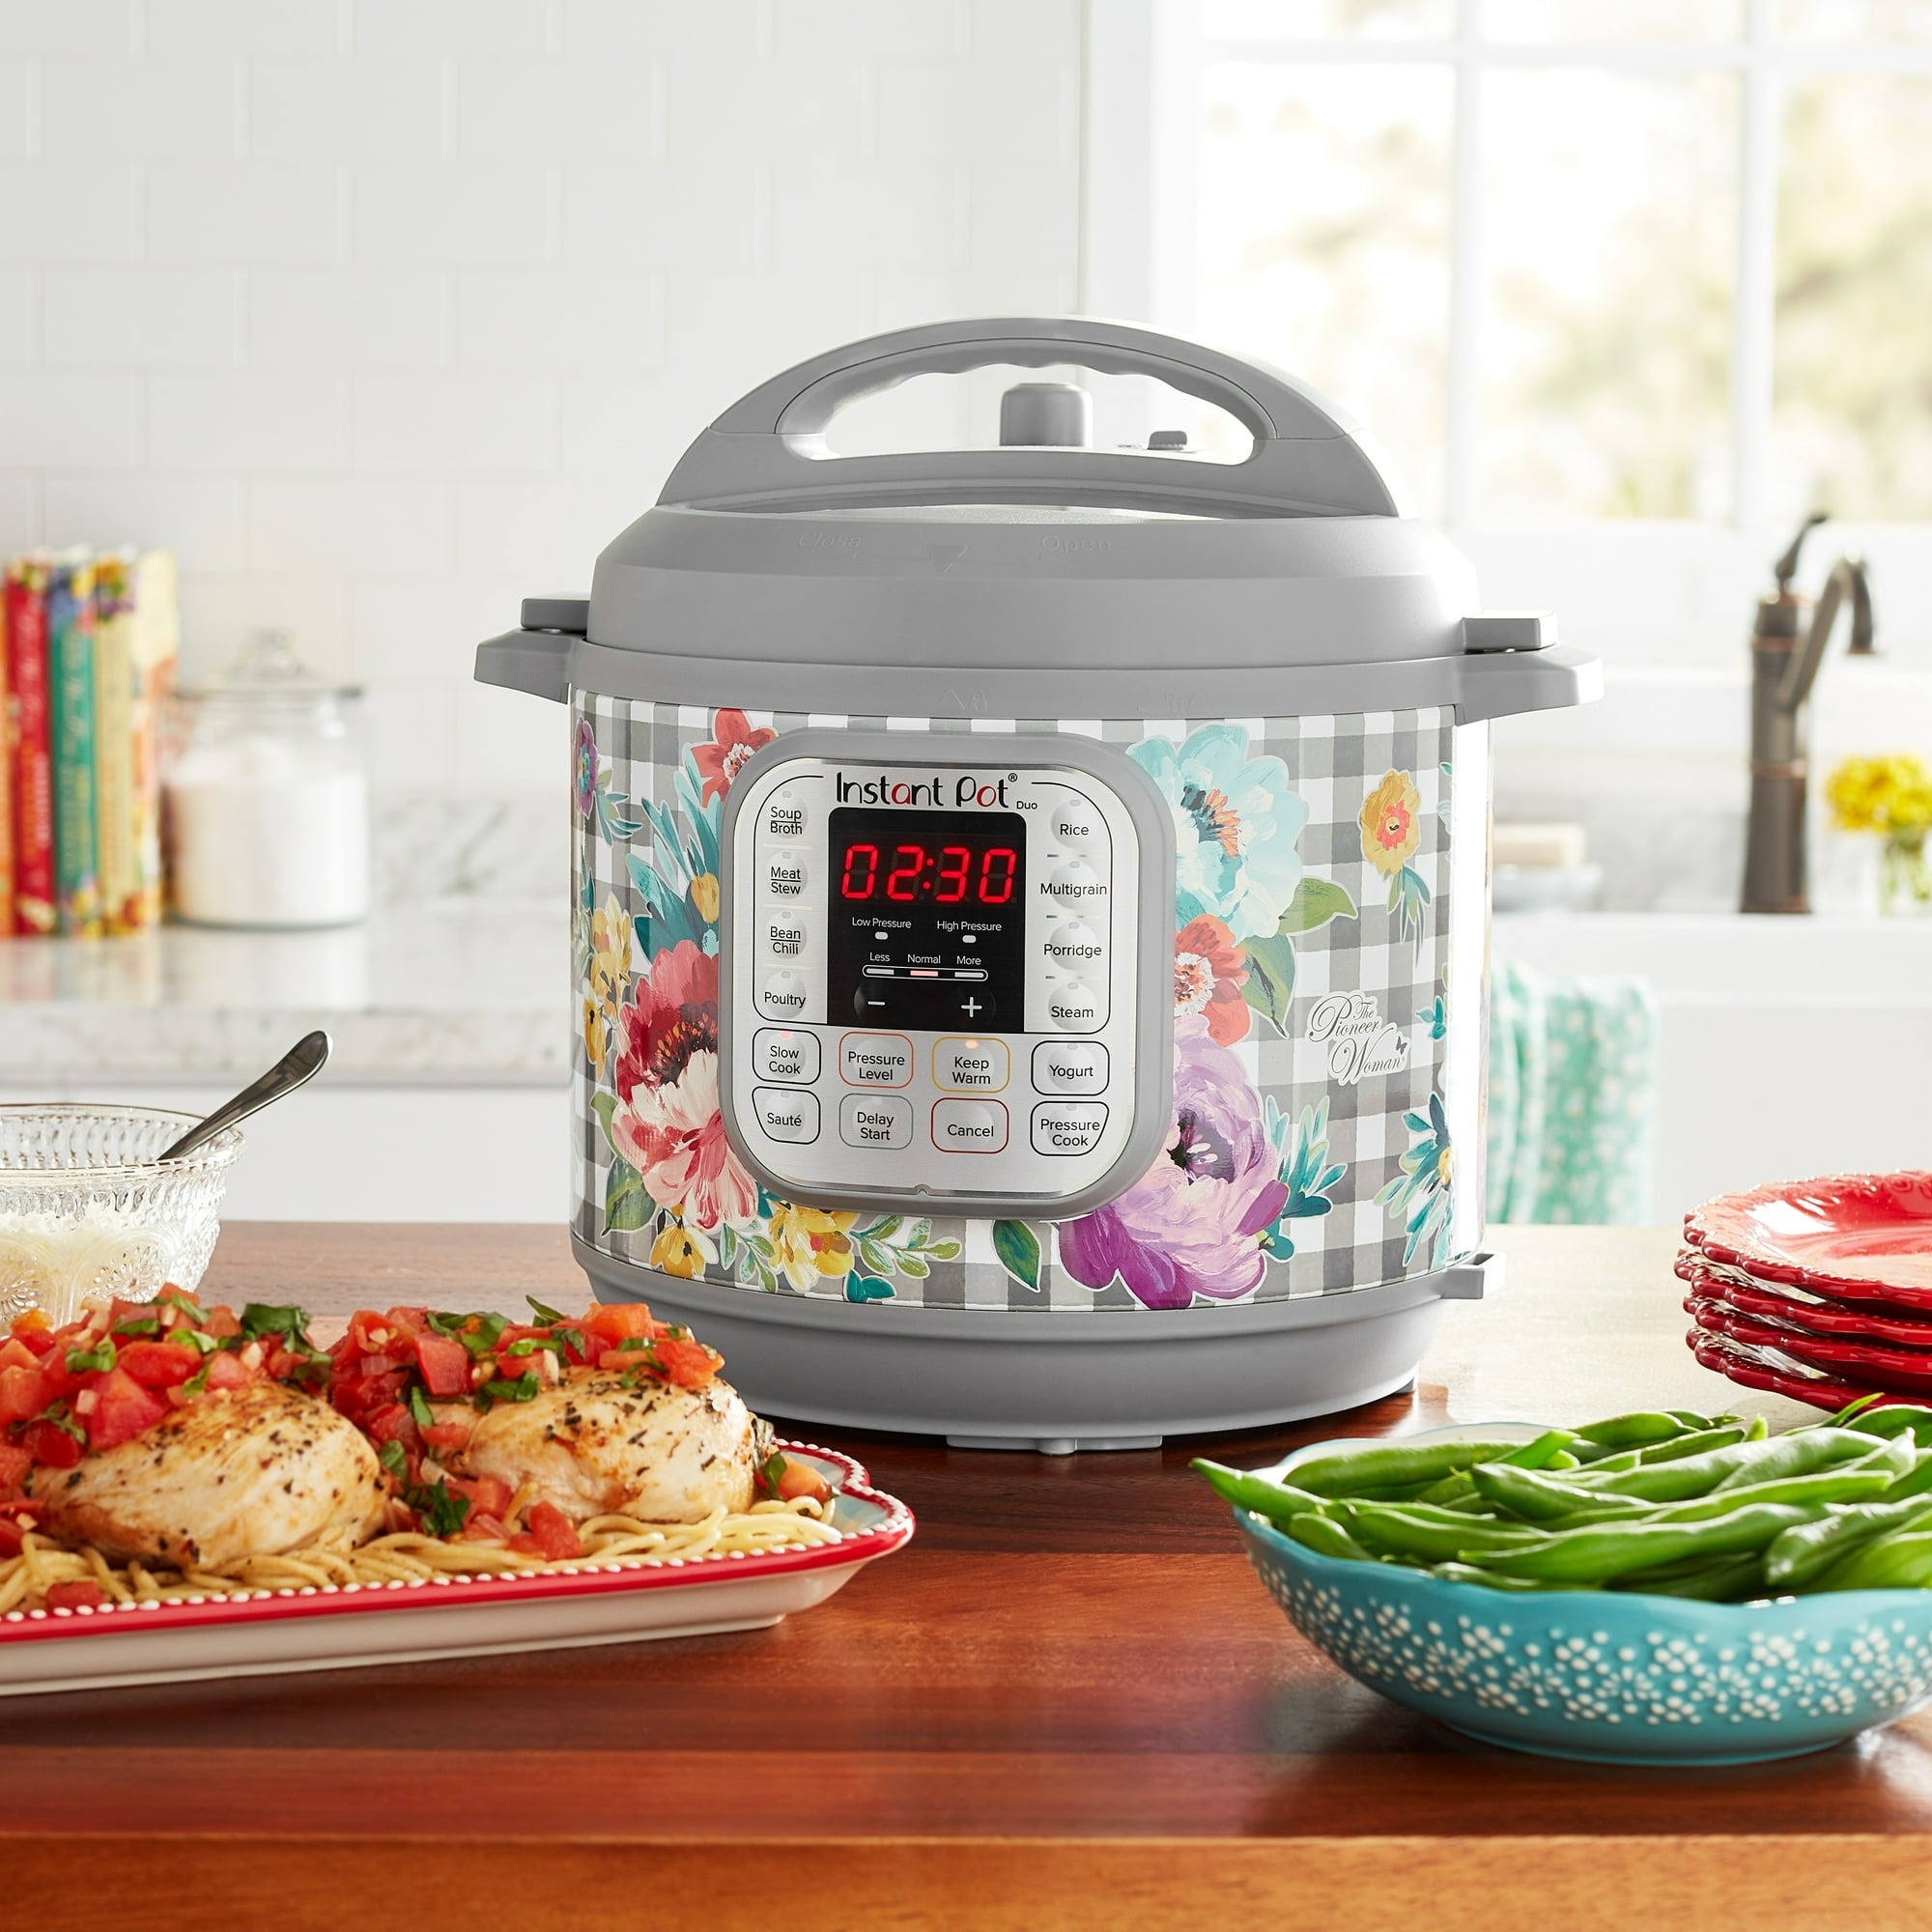 A floral-patterned Instant Pot on a kitchen counter with food dishes nearby